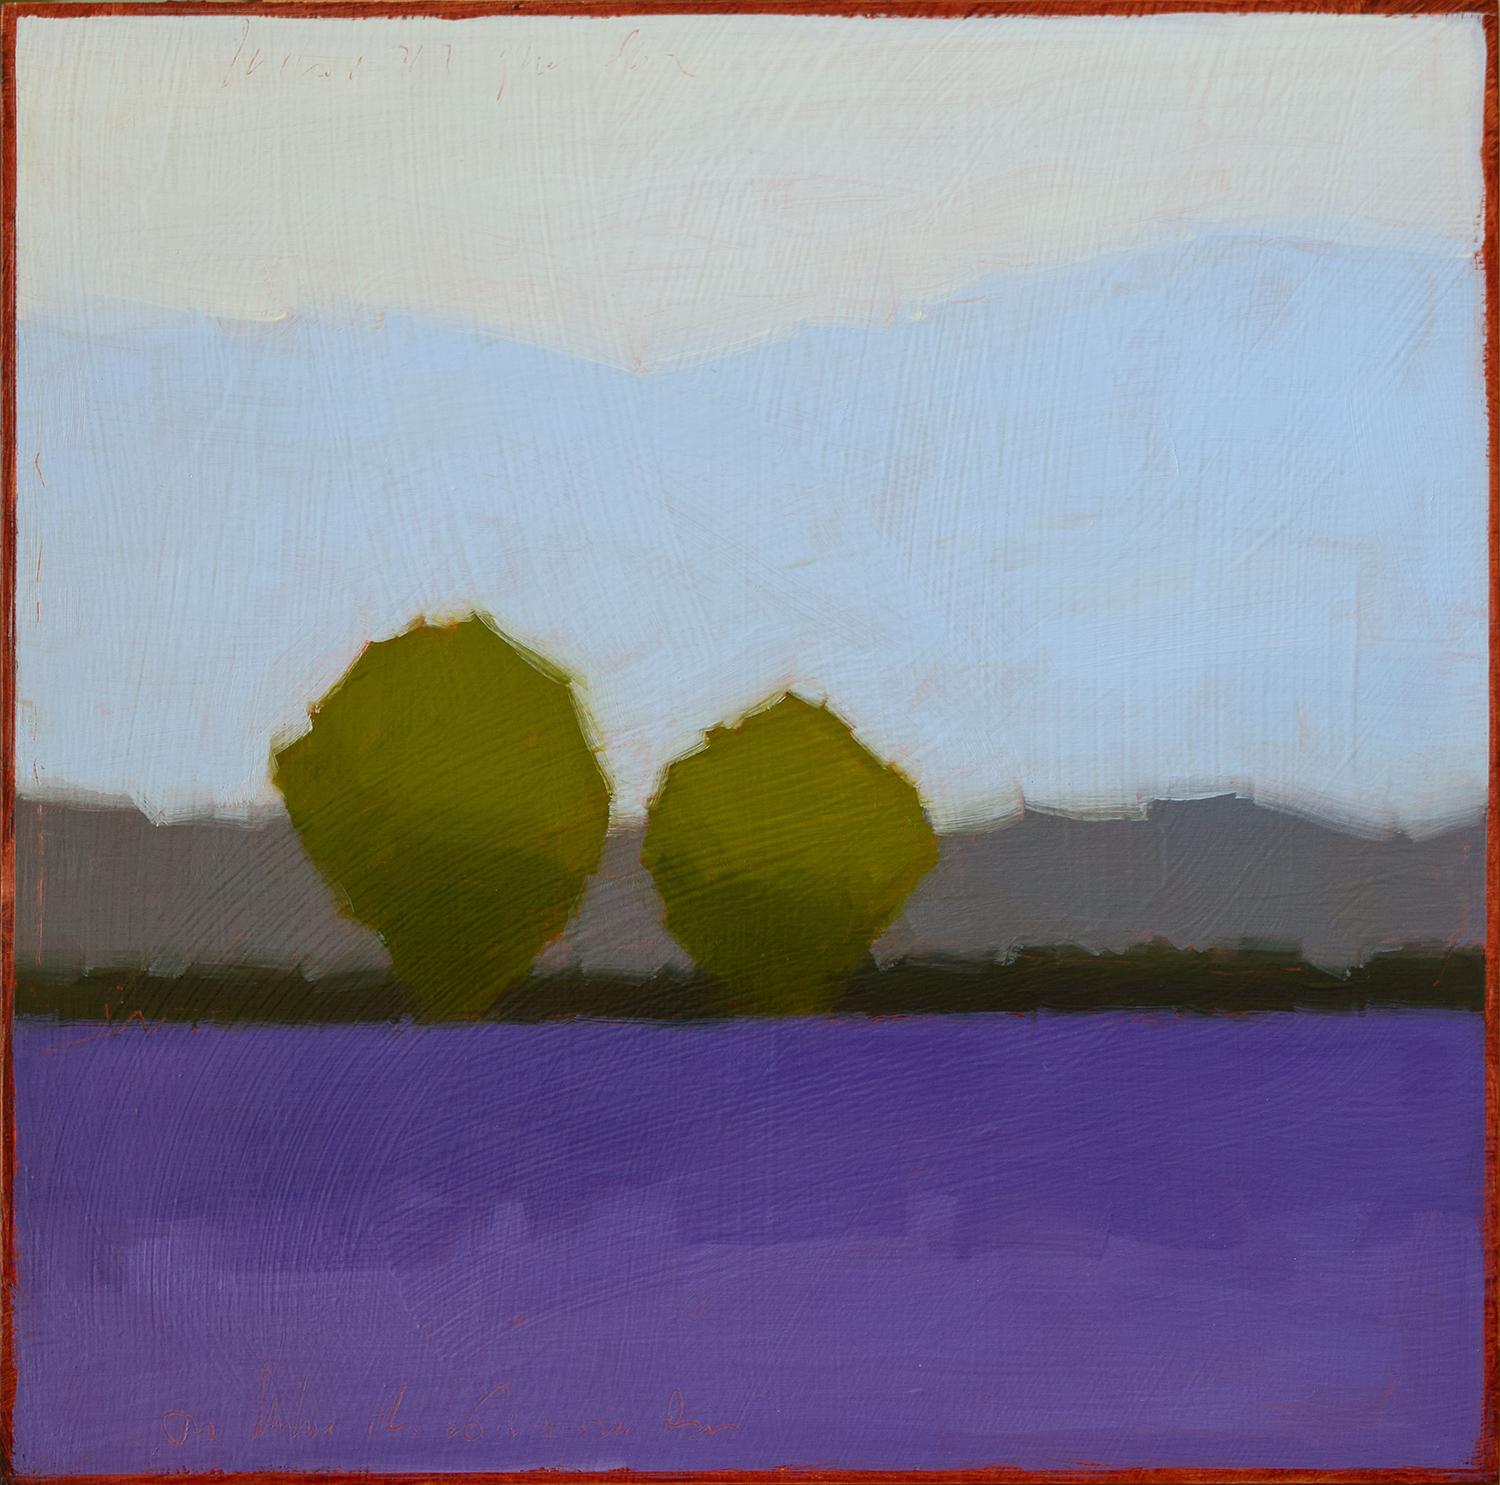 Two Olive Trees (Color Field Painting of a Rural Landscape by Tracy Helgeson)